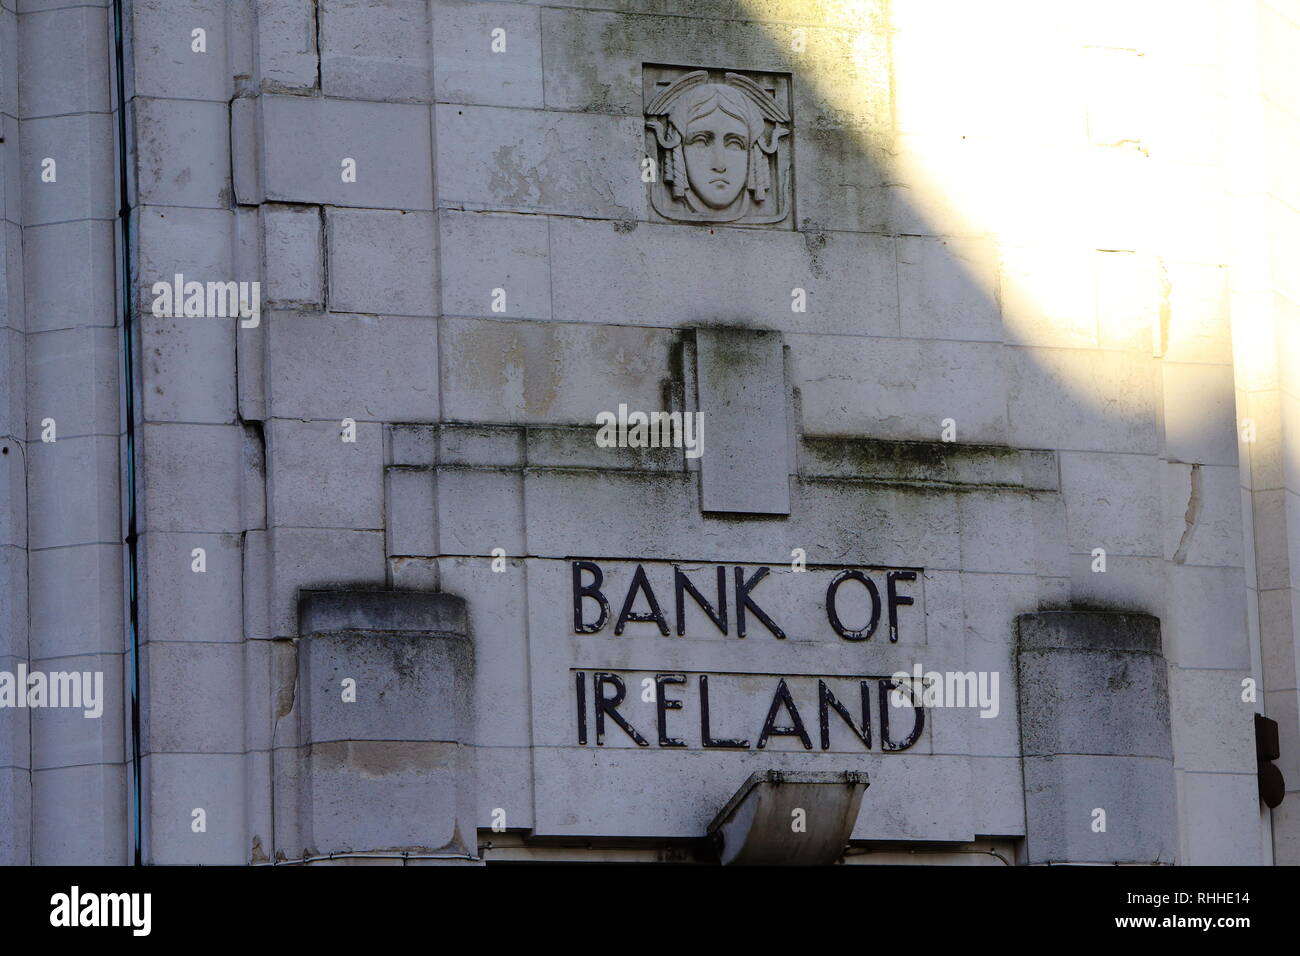 Old Bank of Ireland type font as seen on a building in Belfast, County Antrim. Standing on the corner of Royal Parade and North Street in the centre of Belfast (less than half a mile north of Donegall Square and the City Hall) the former Bank of Ireland Building is one of the finest Modernist buildings in Ireland. The building was constructed during 1929 and 1930 to designs by Joseph Vincent Downes. Born in 1891, Downes studied architecture at University College Dublin before graduating in 1920. During his studies Downes worked an apprenticeship at the architectural practice of Lucius O'Callag Stock Photo